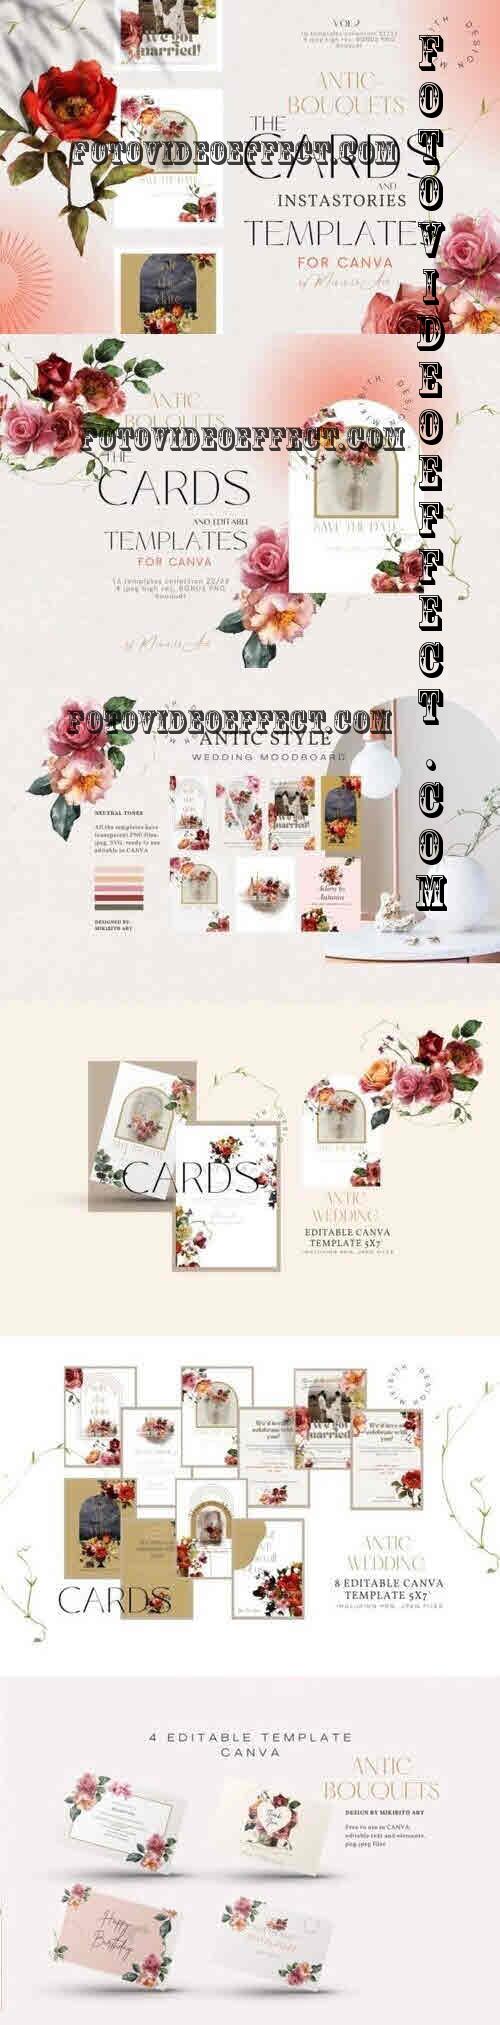 Antic Bouquets Cards and Instagram Templates